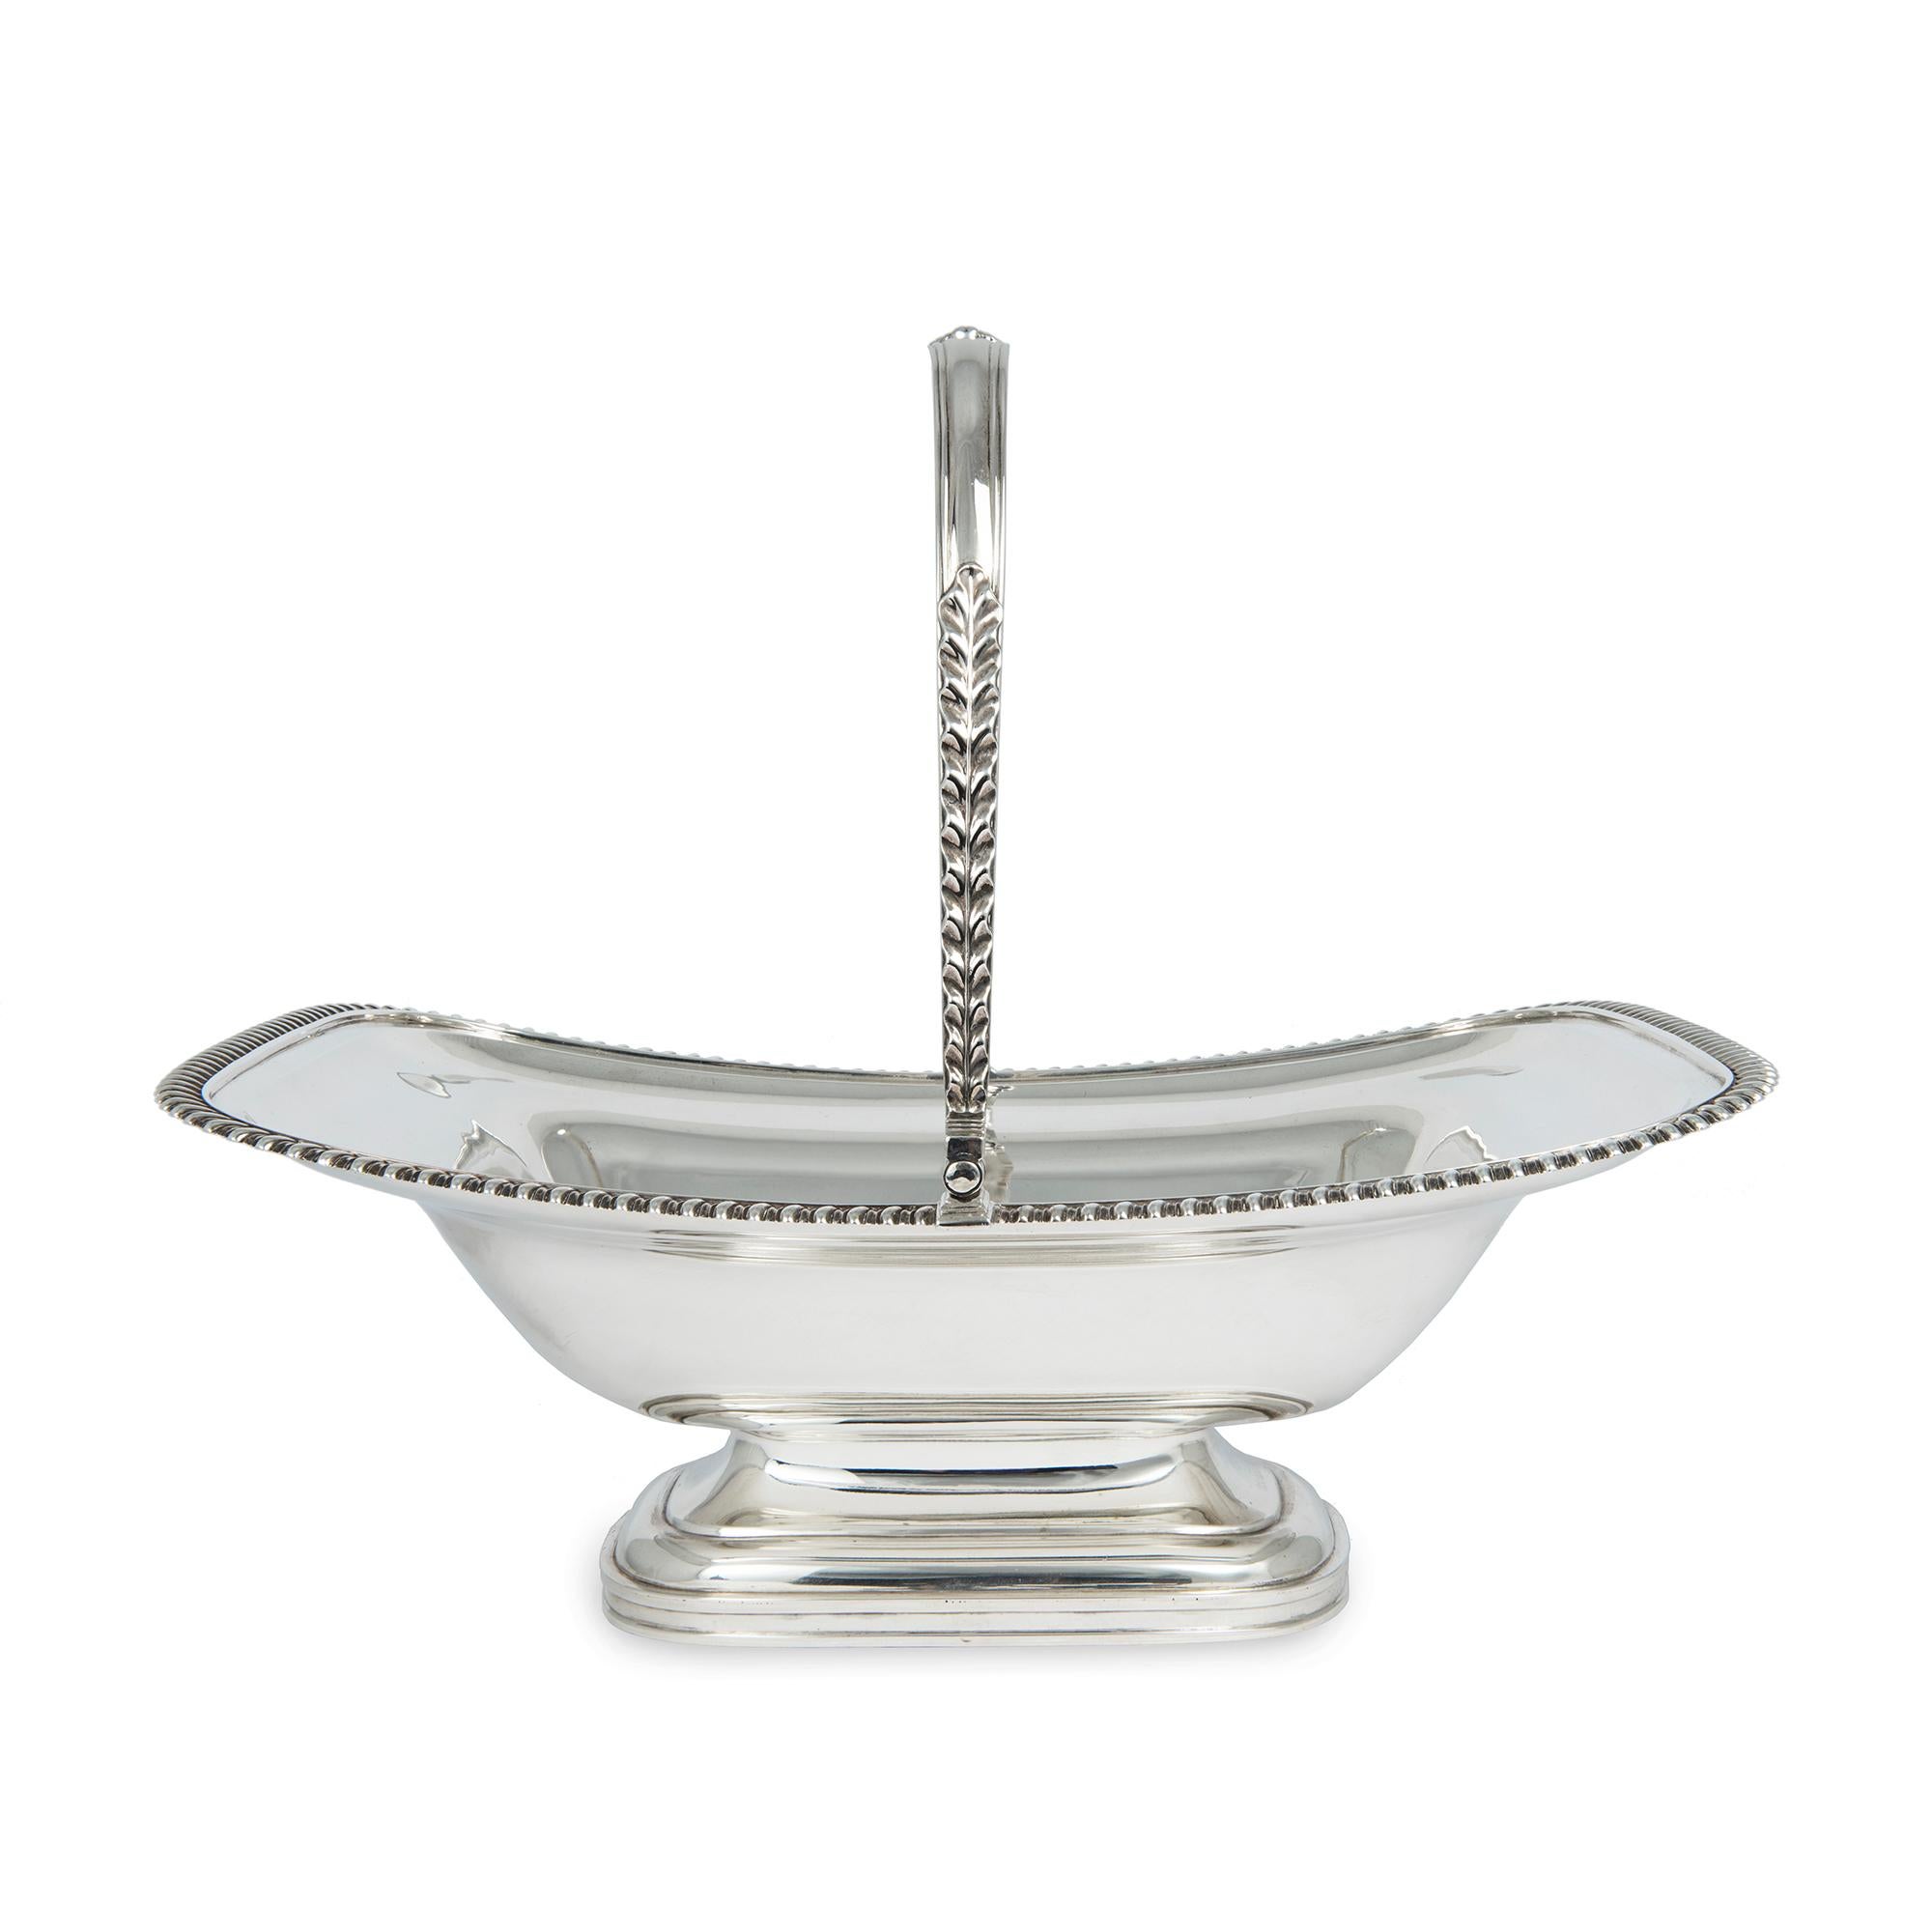 A sterling silver George IV bread basket, with gadrooned border,the swing handle has applied shell and acanthus leaf decoration, with the centre of the body engraved with an armorial, weight 1,099grms (35ozs), length 32cms (12.5